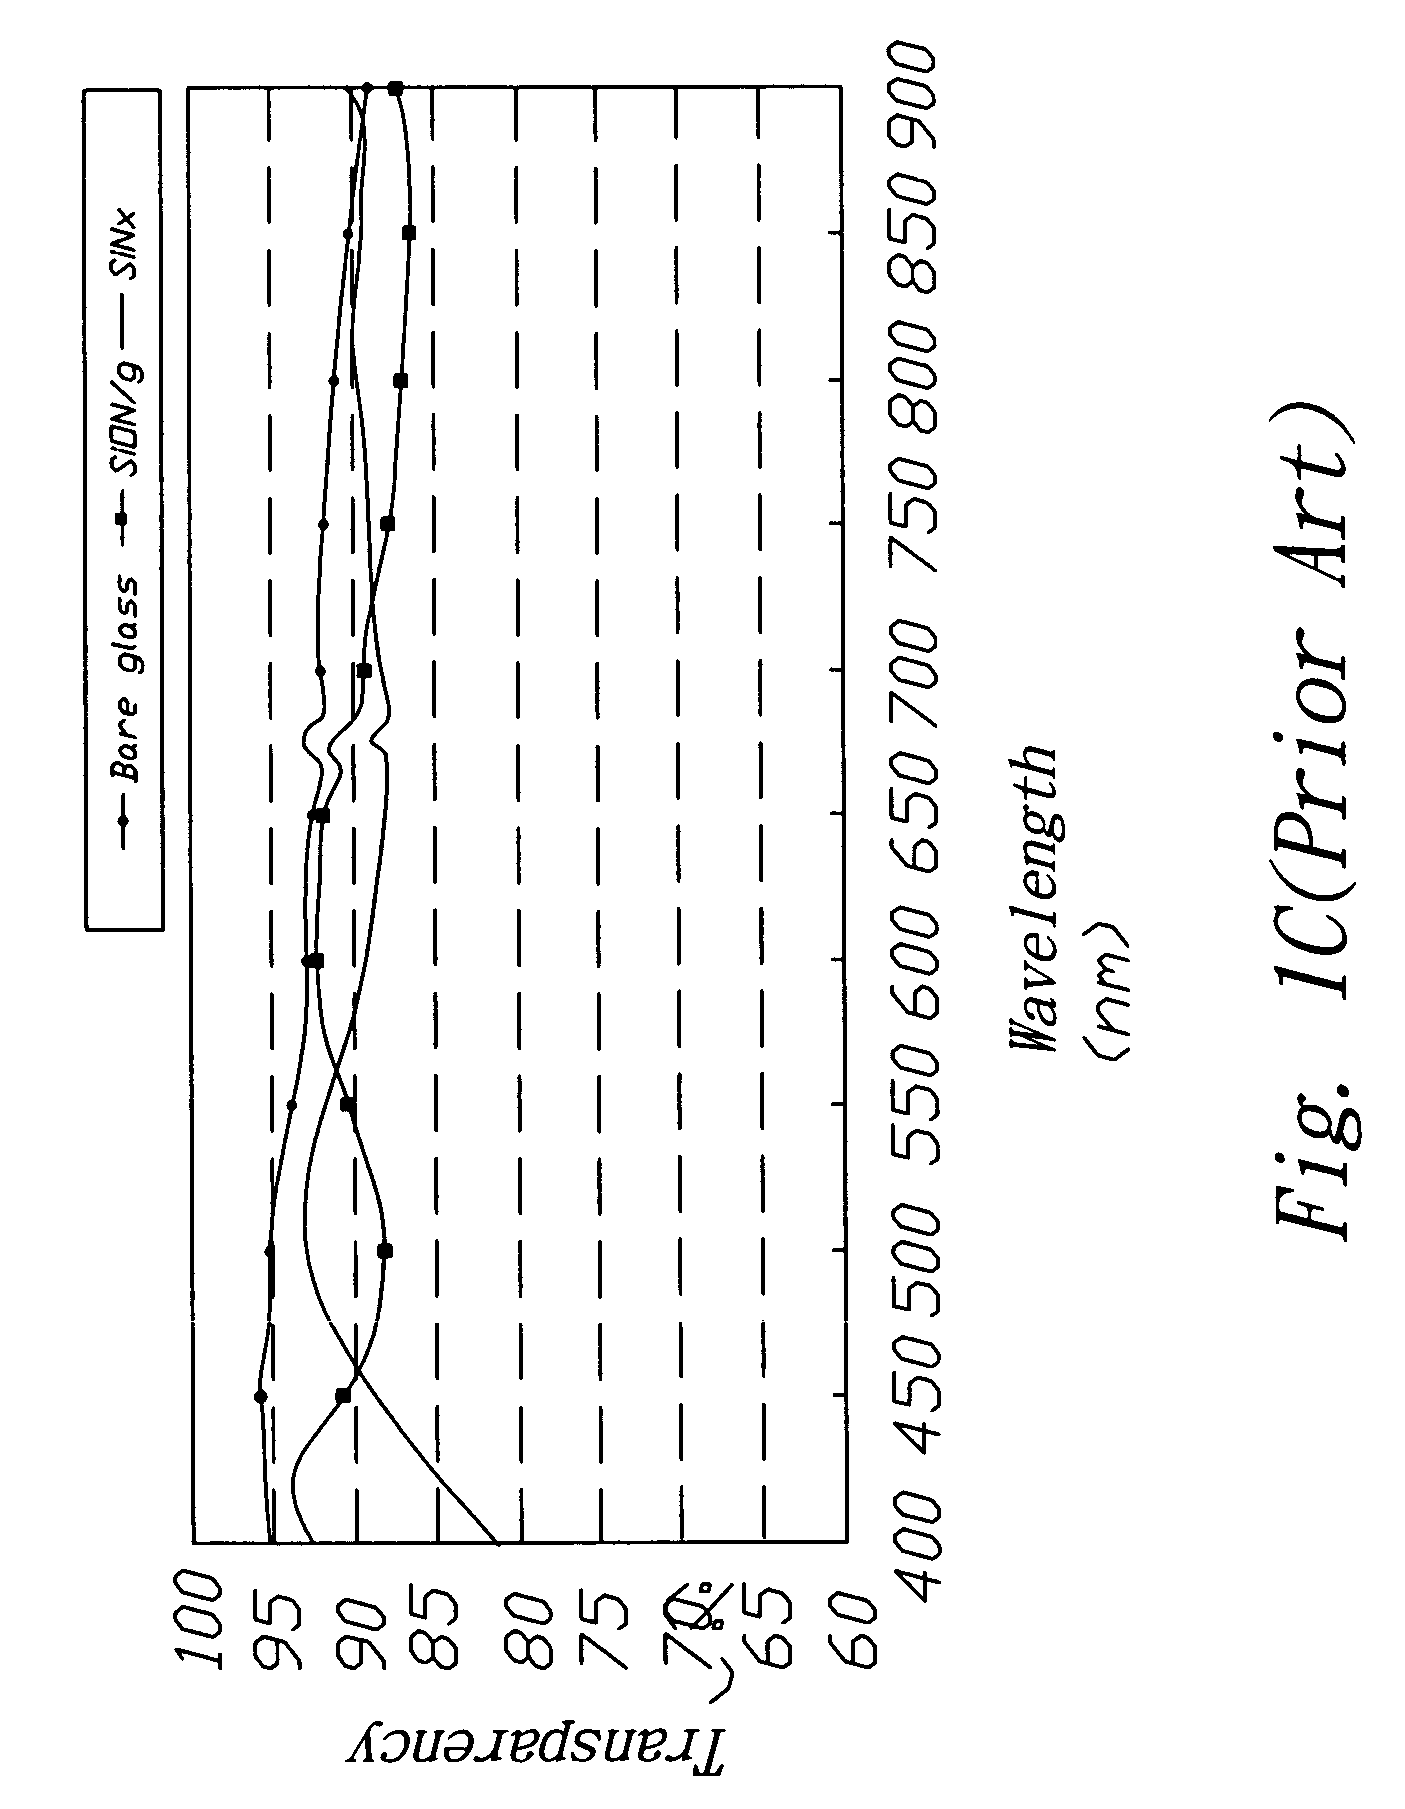 Light-emitting diode structure with transparent window covering layer of multiple films